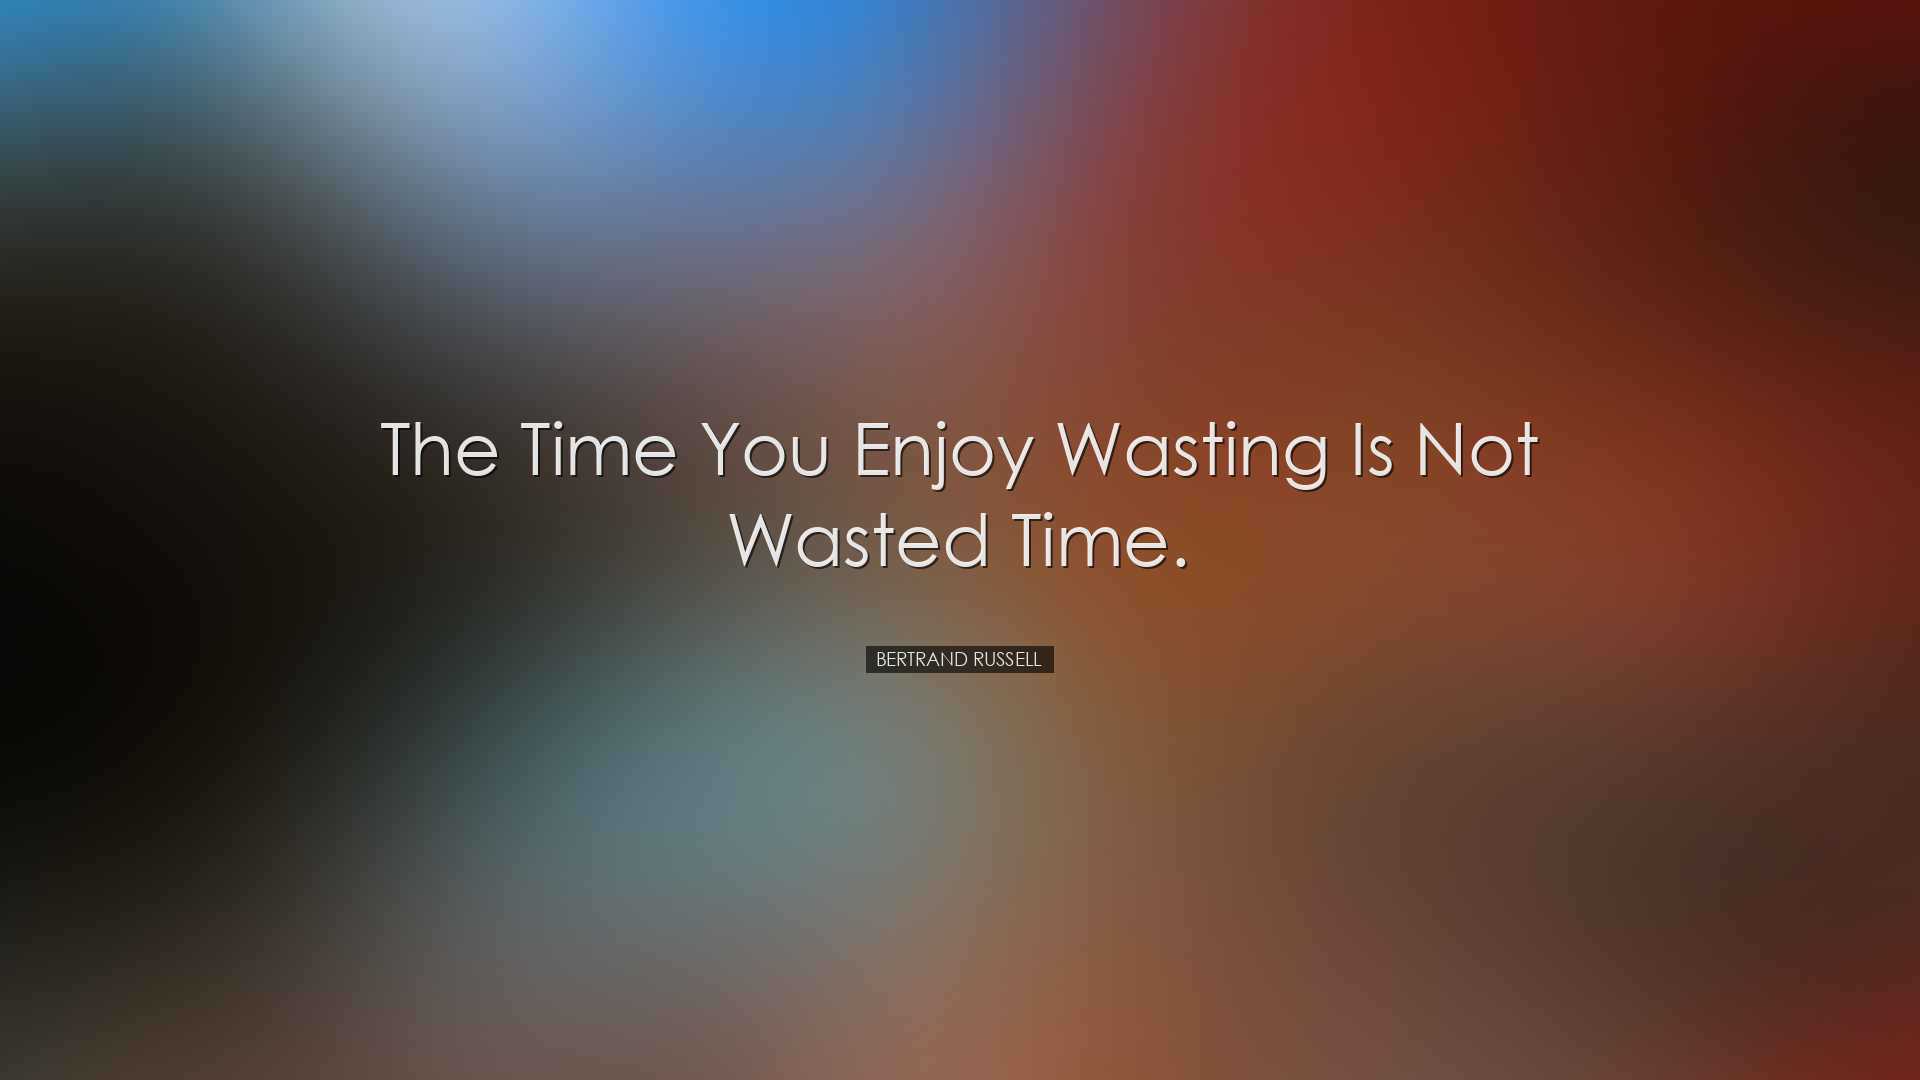 The time you enjoy wasting is not wasted time. - Bertrand Russell